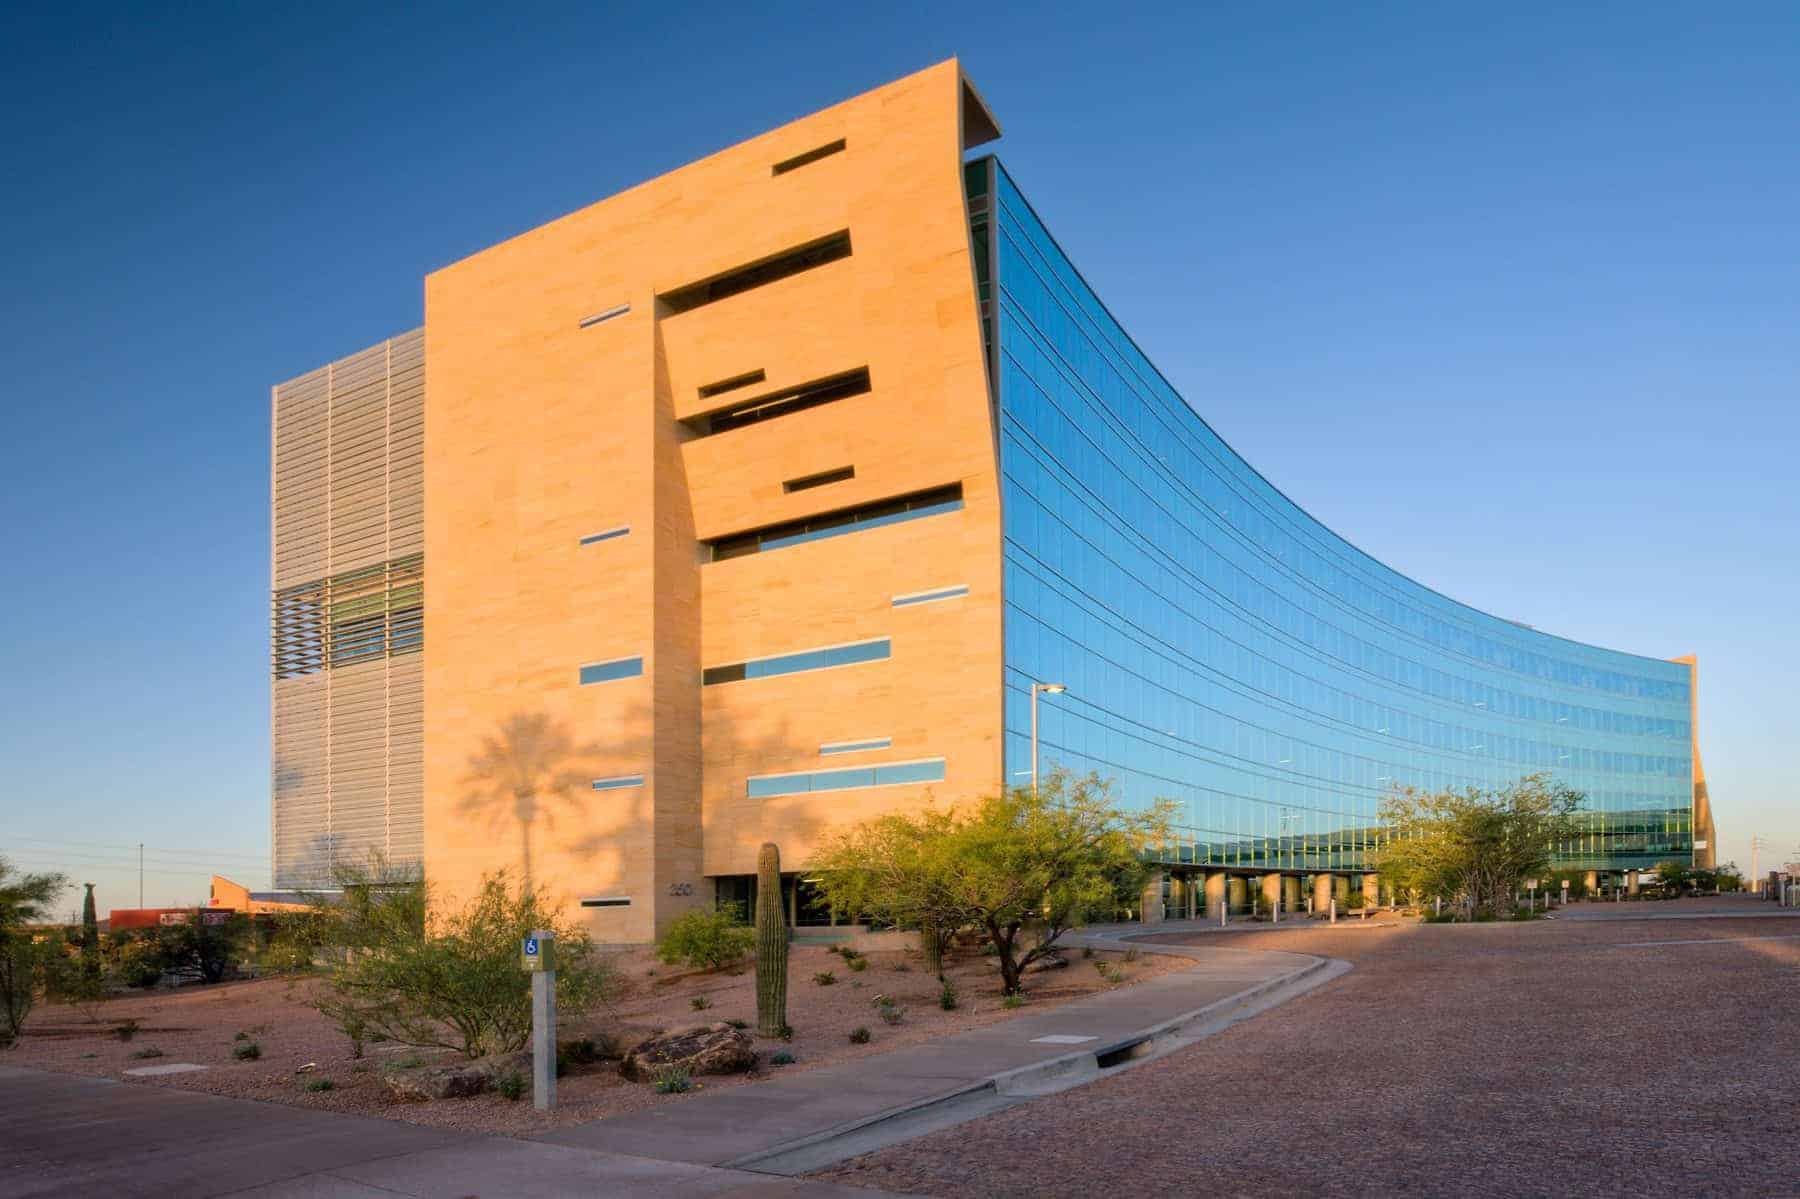 Modern building with curved glass facade in Tempe